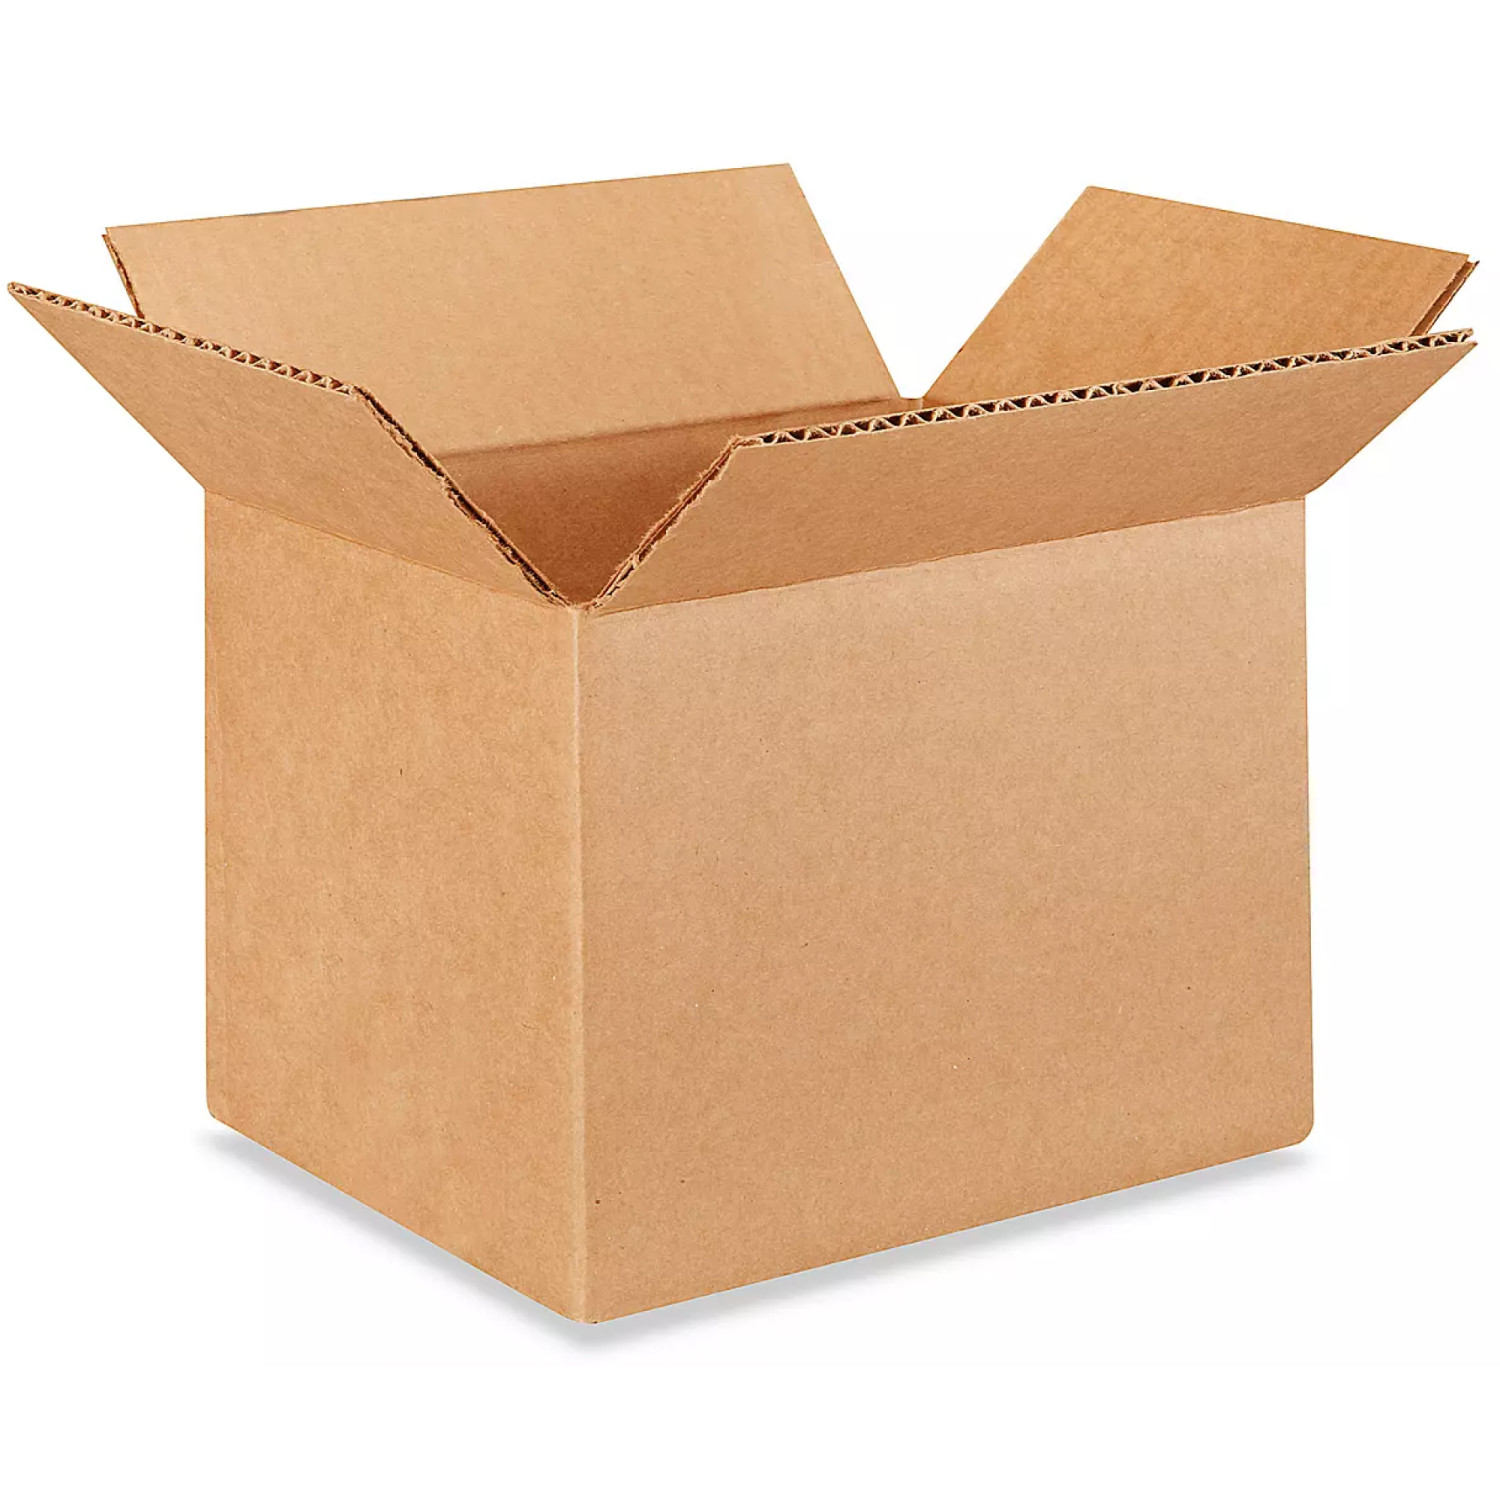 Сube Boxes In USA, Cheap Moving Boxes